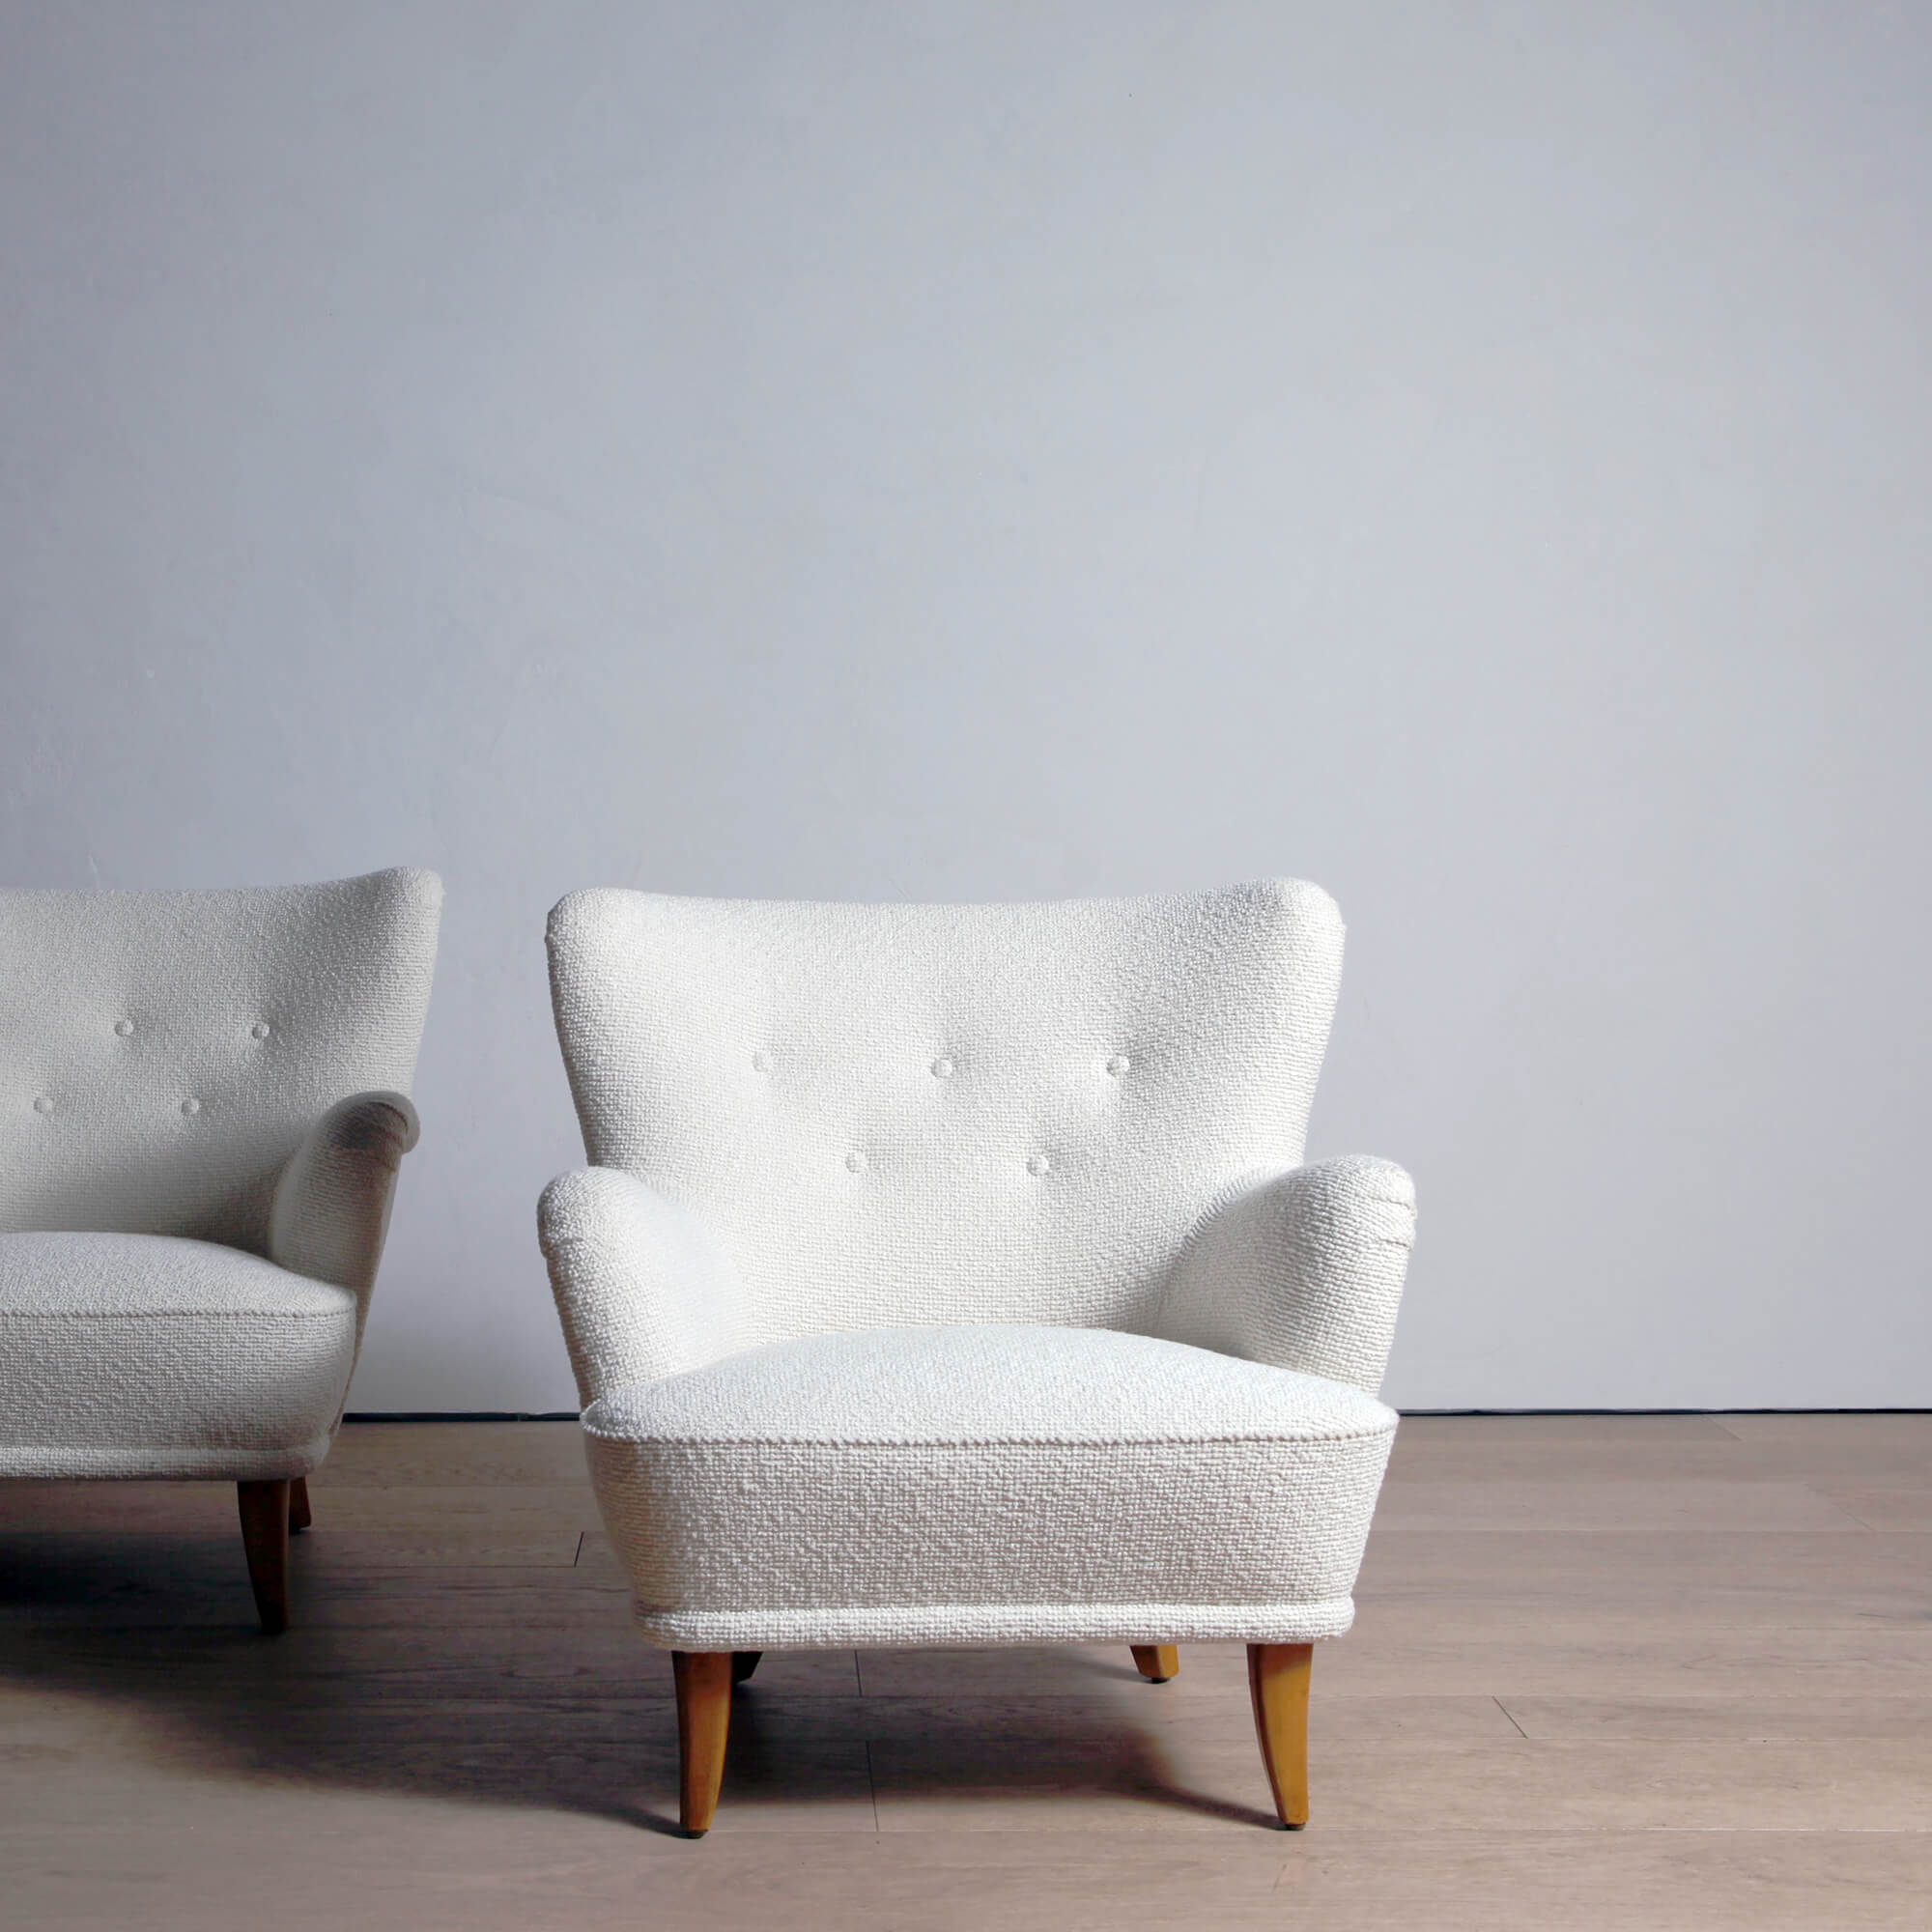 Pair of Laila lounge chairs by Ilmari Lappalainen for Asko